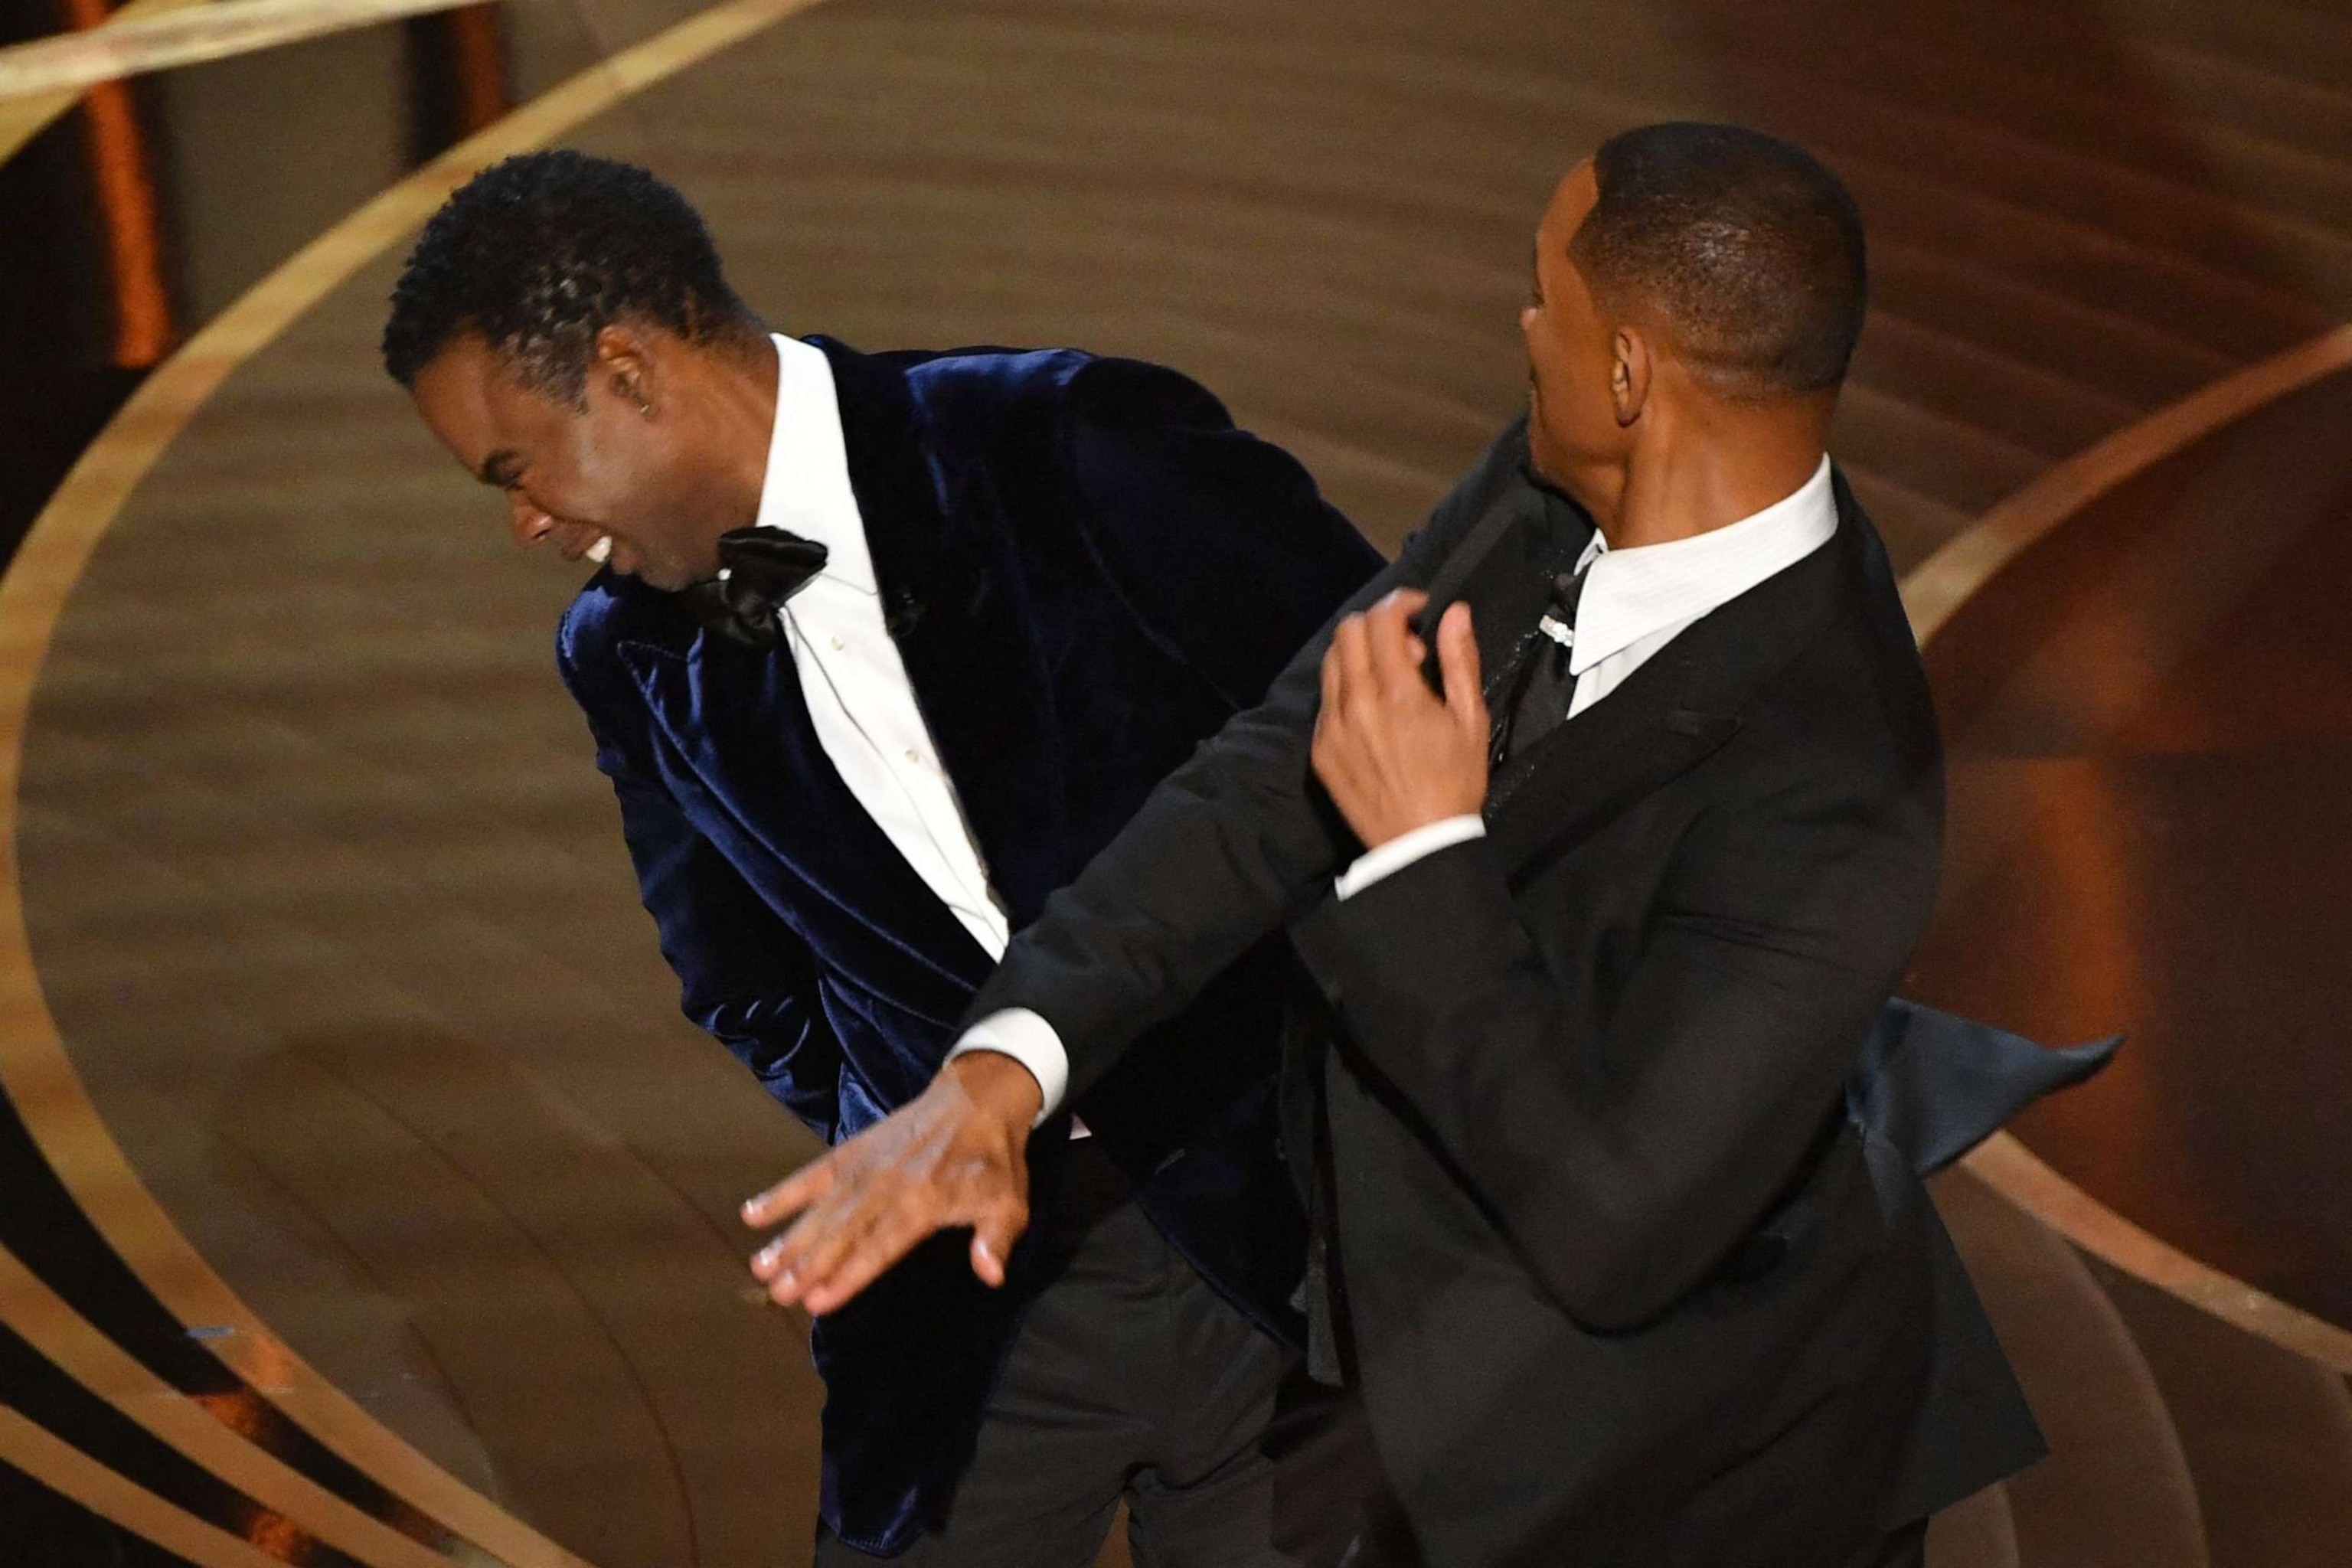 PHOTO: Will Smith slaps Chris Rock onstage during the 94th Oscars at the Dolby Theatre in Hollywood, California on March 27, 2022.